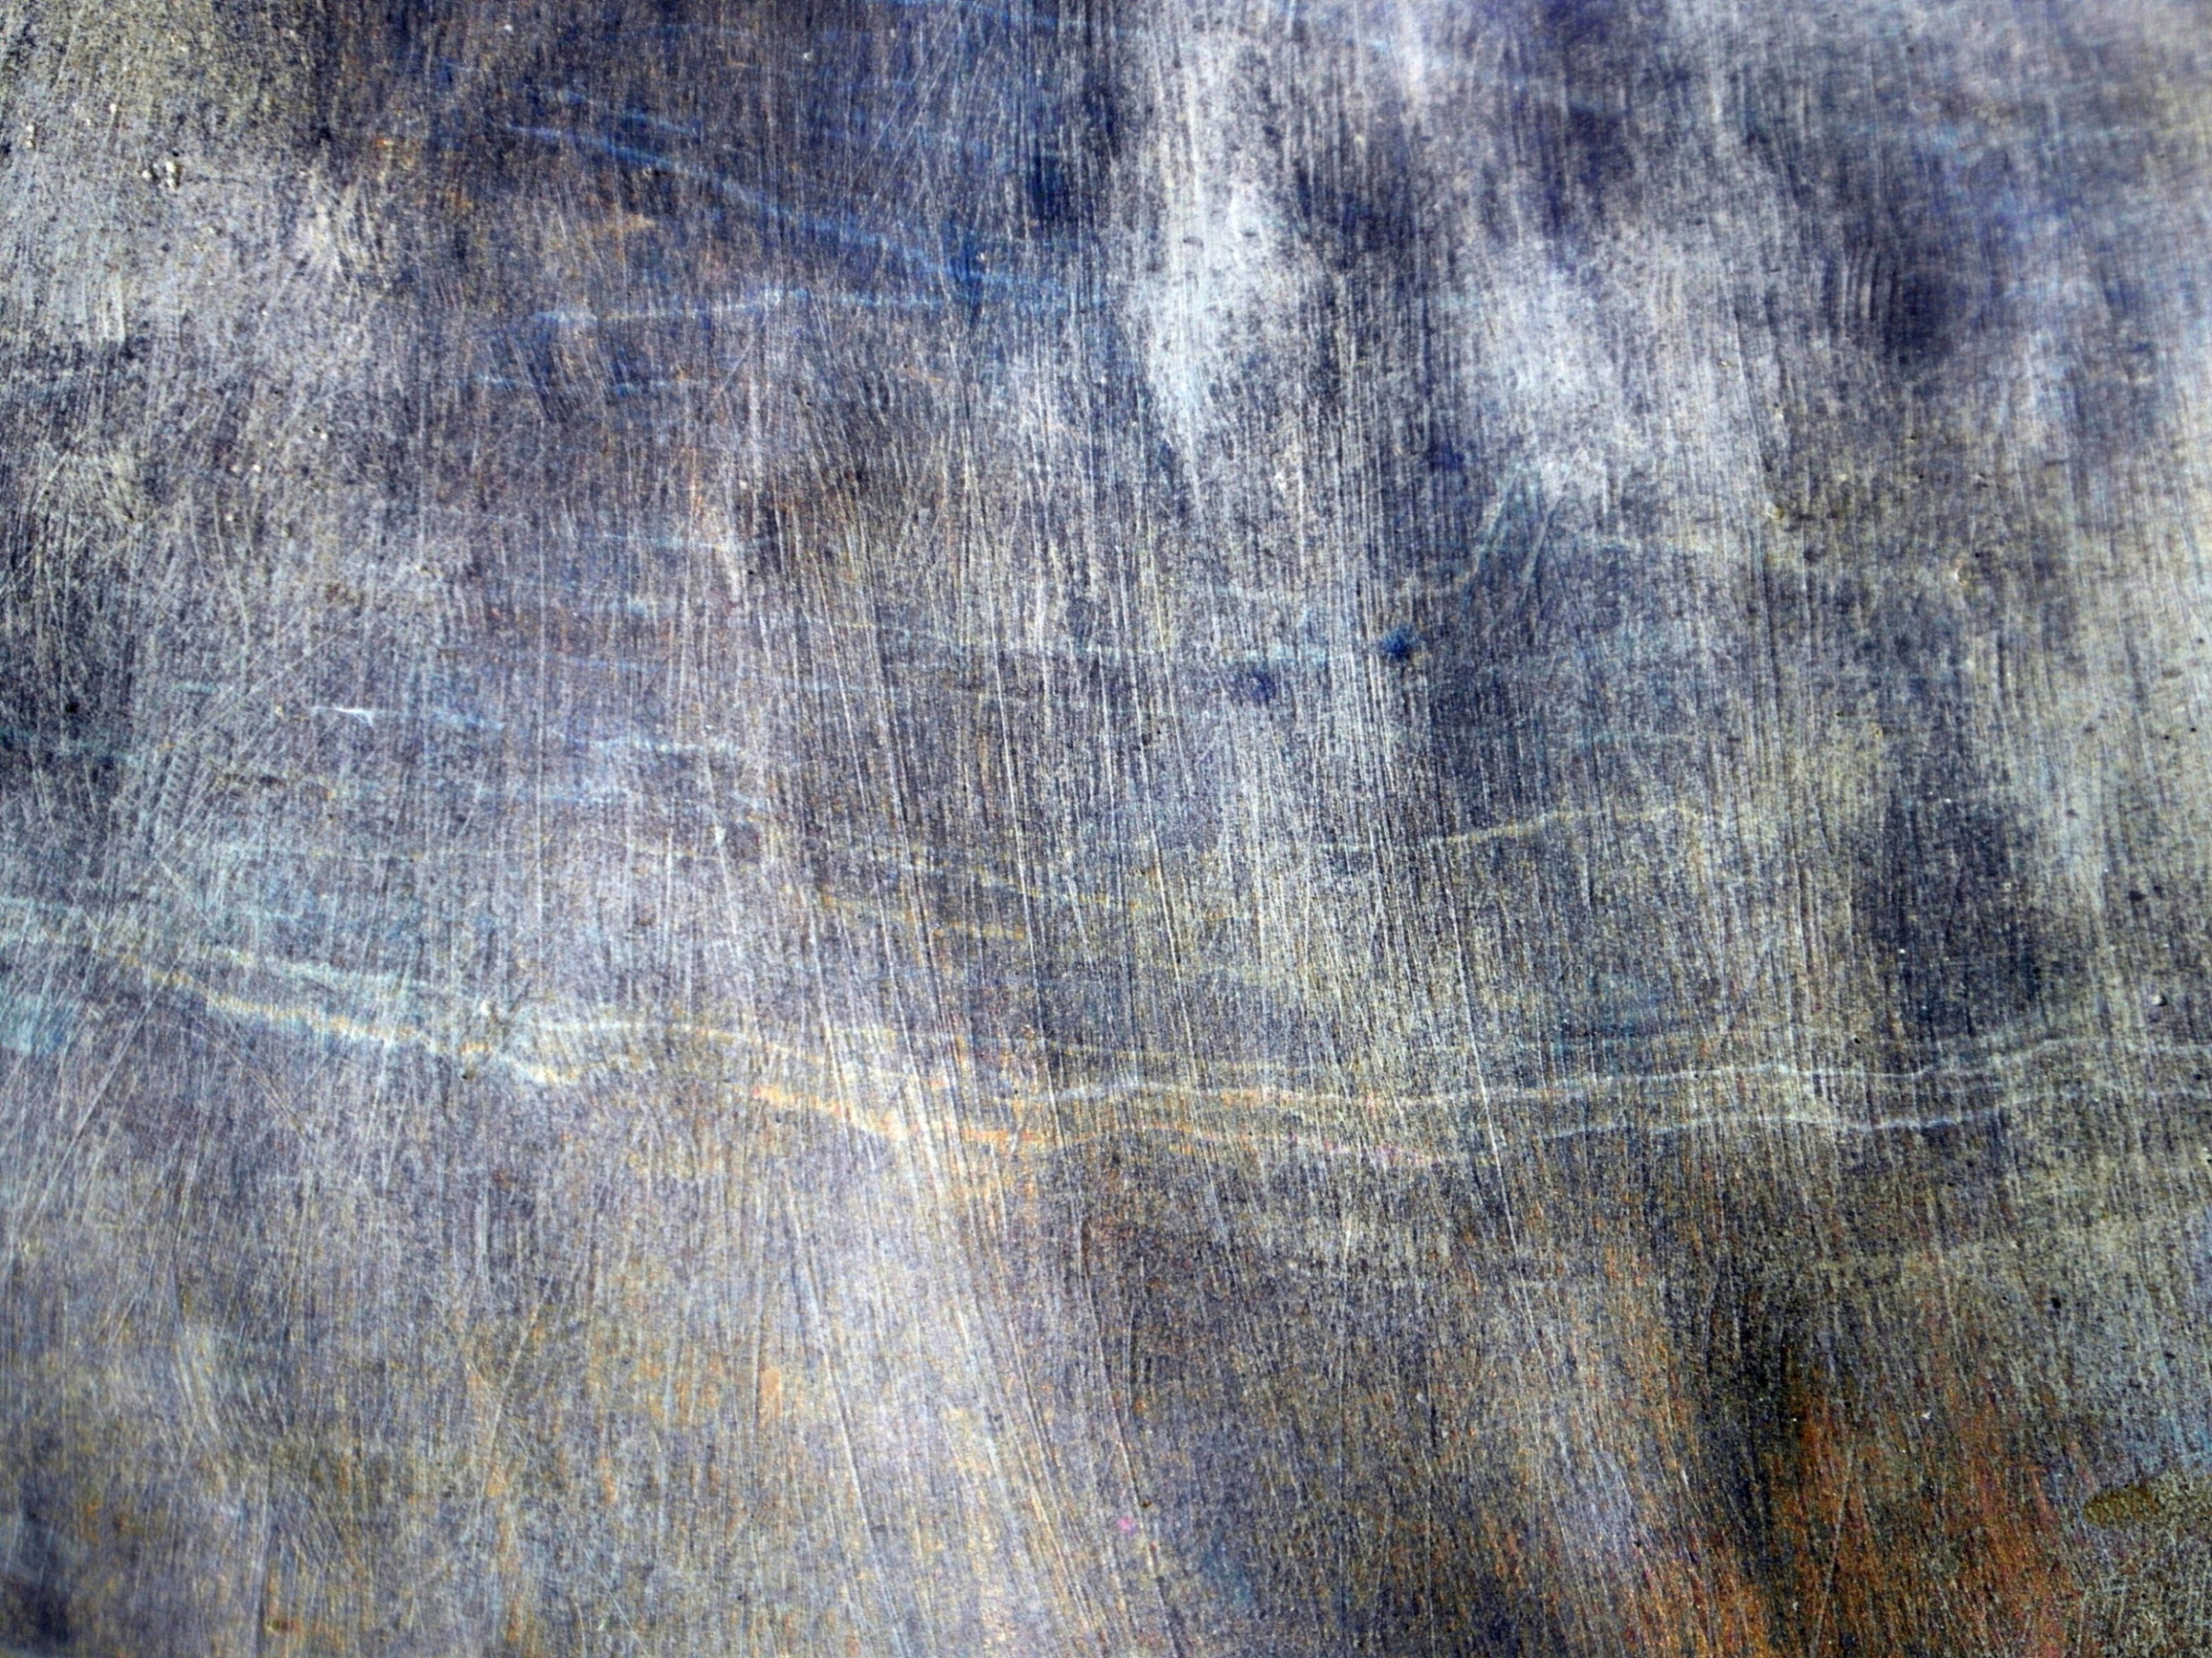 Scratched metal grunge background photo